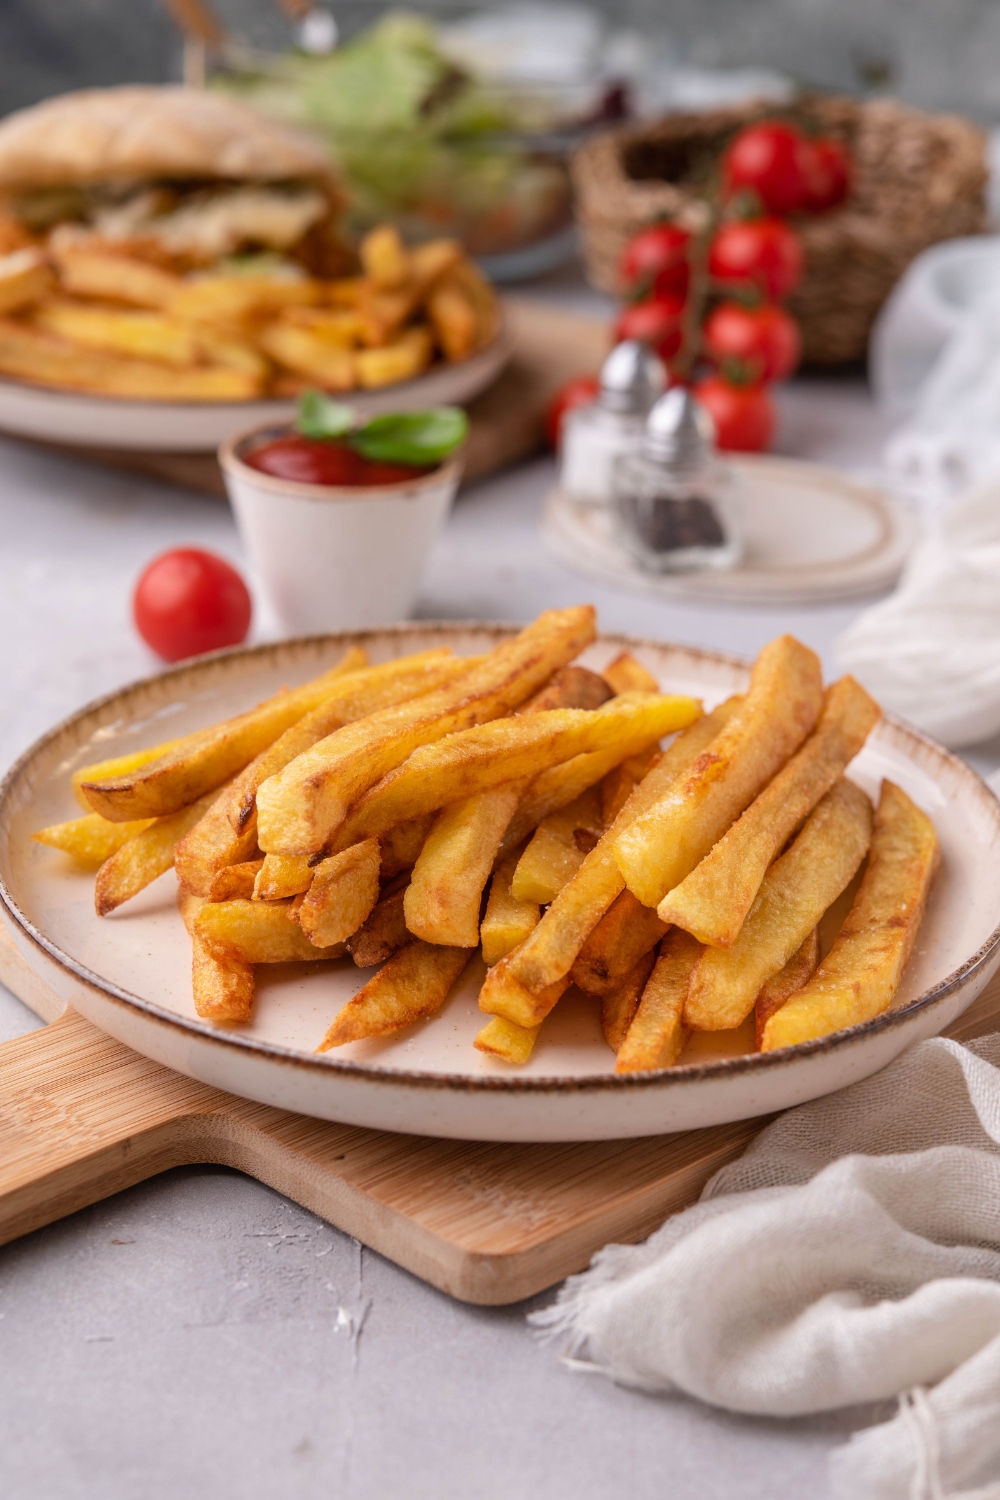 A plate with fries.